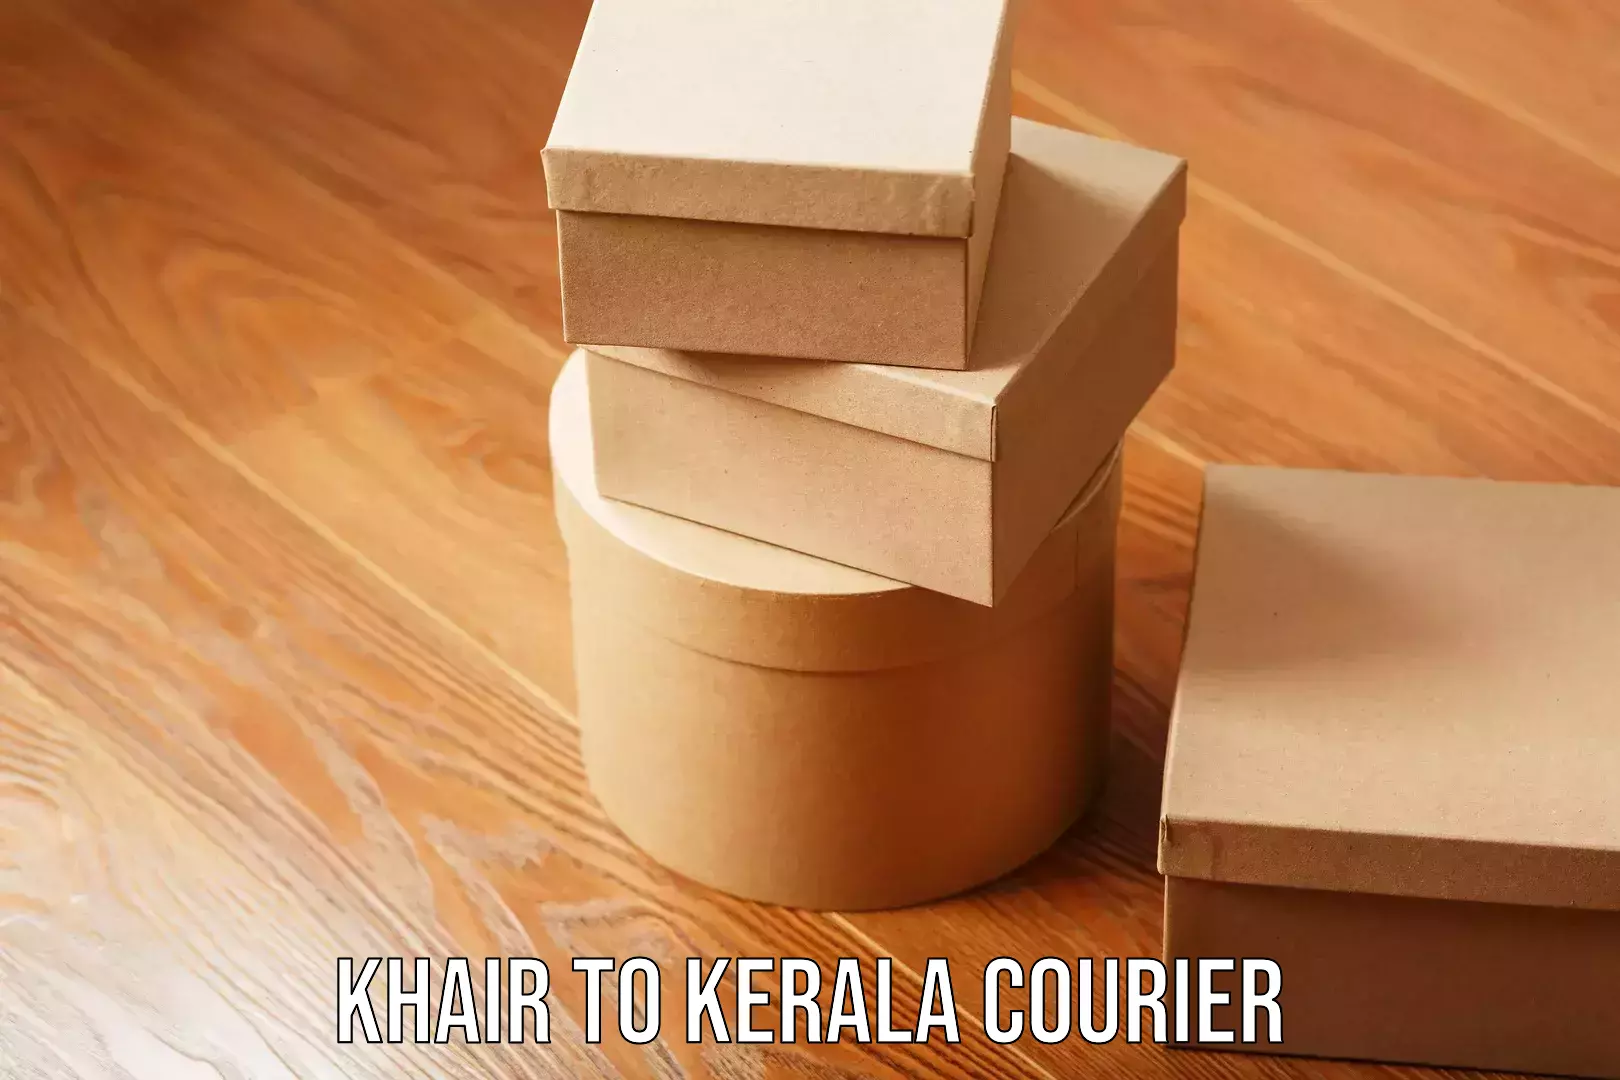 Home moving specialists Khair to Kerala